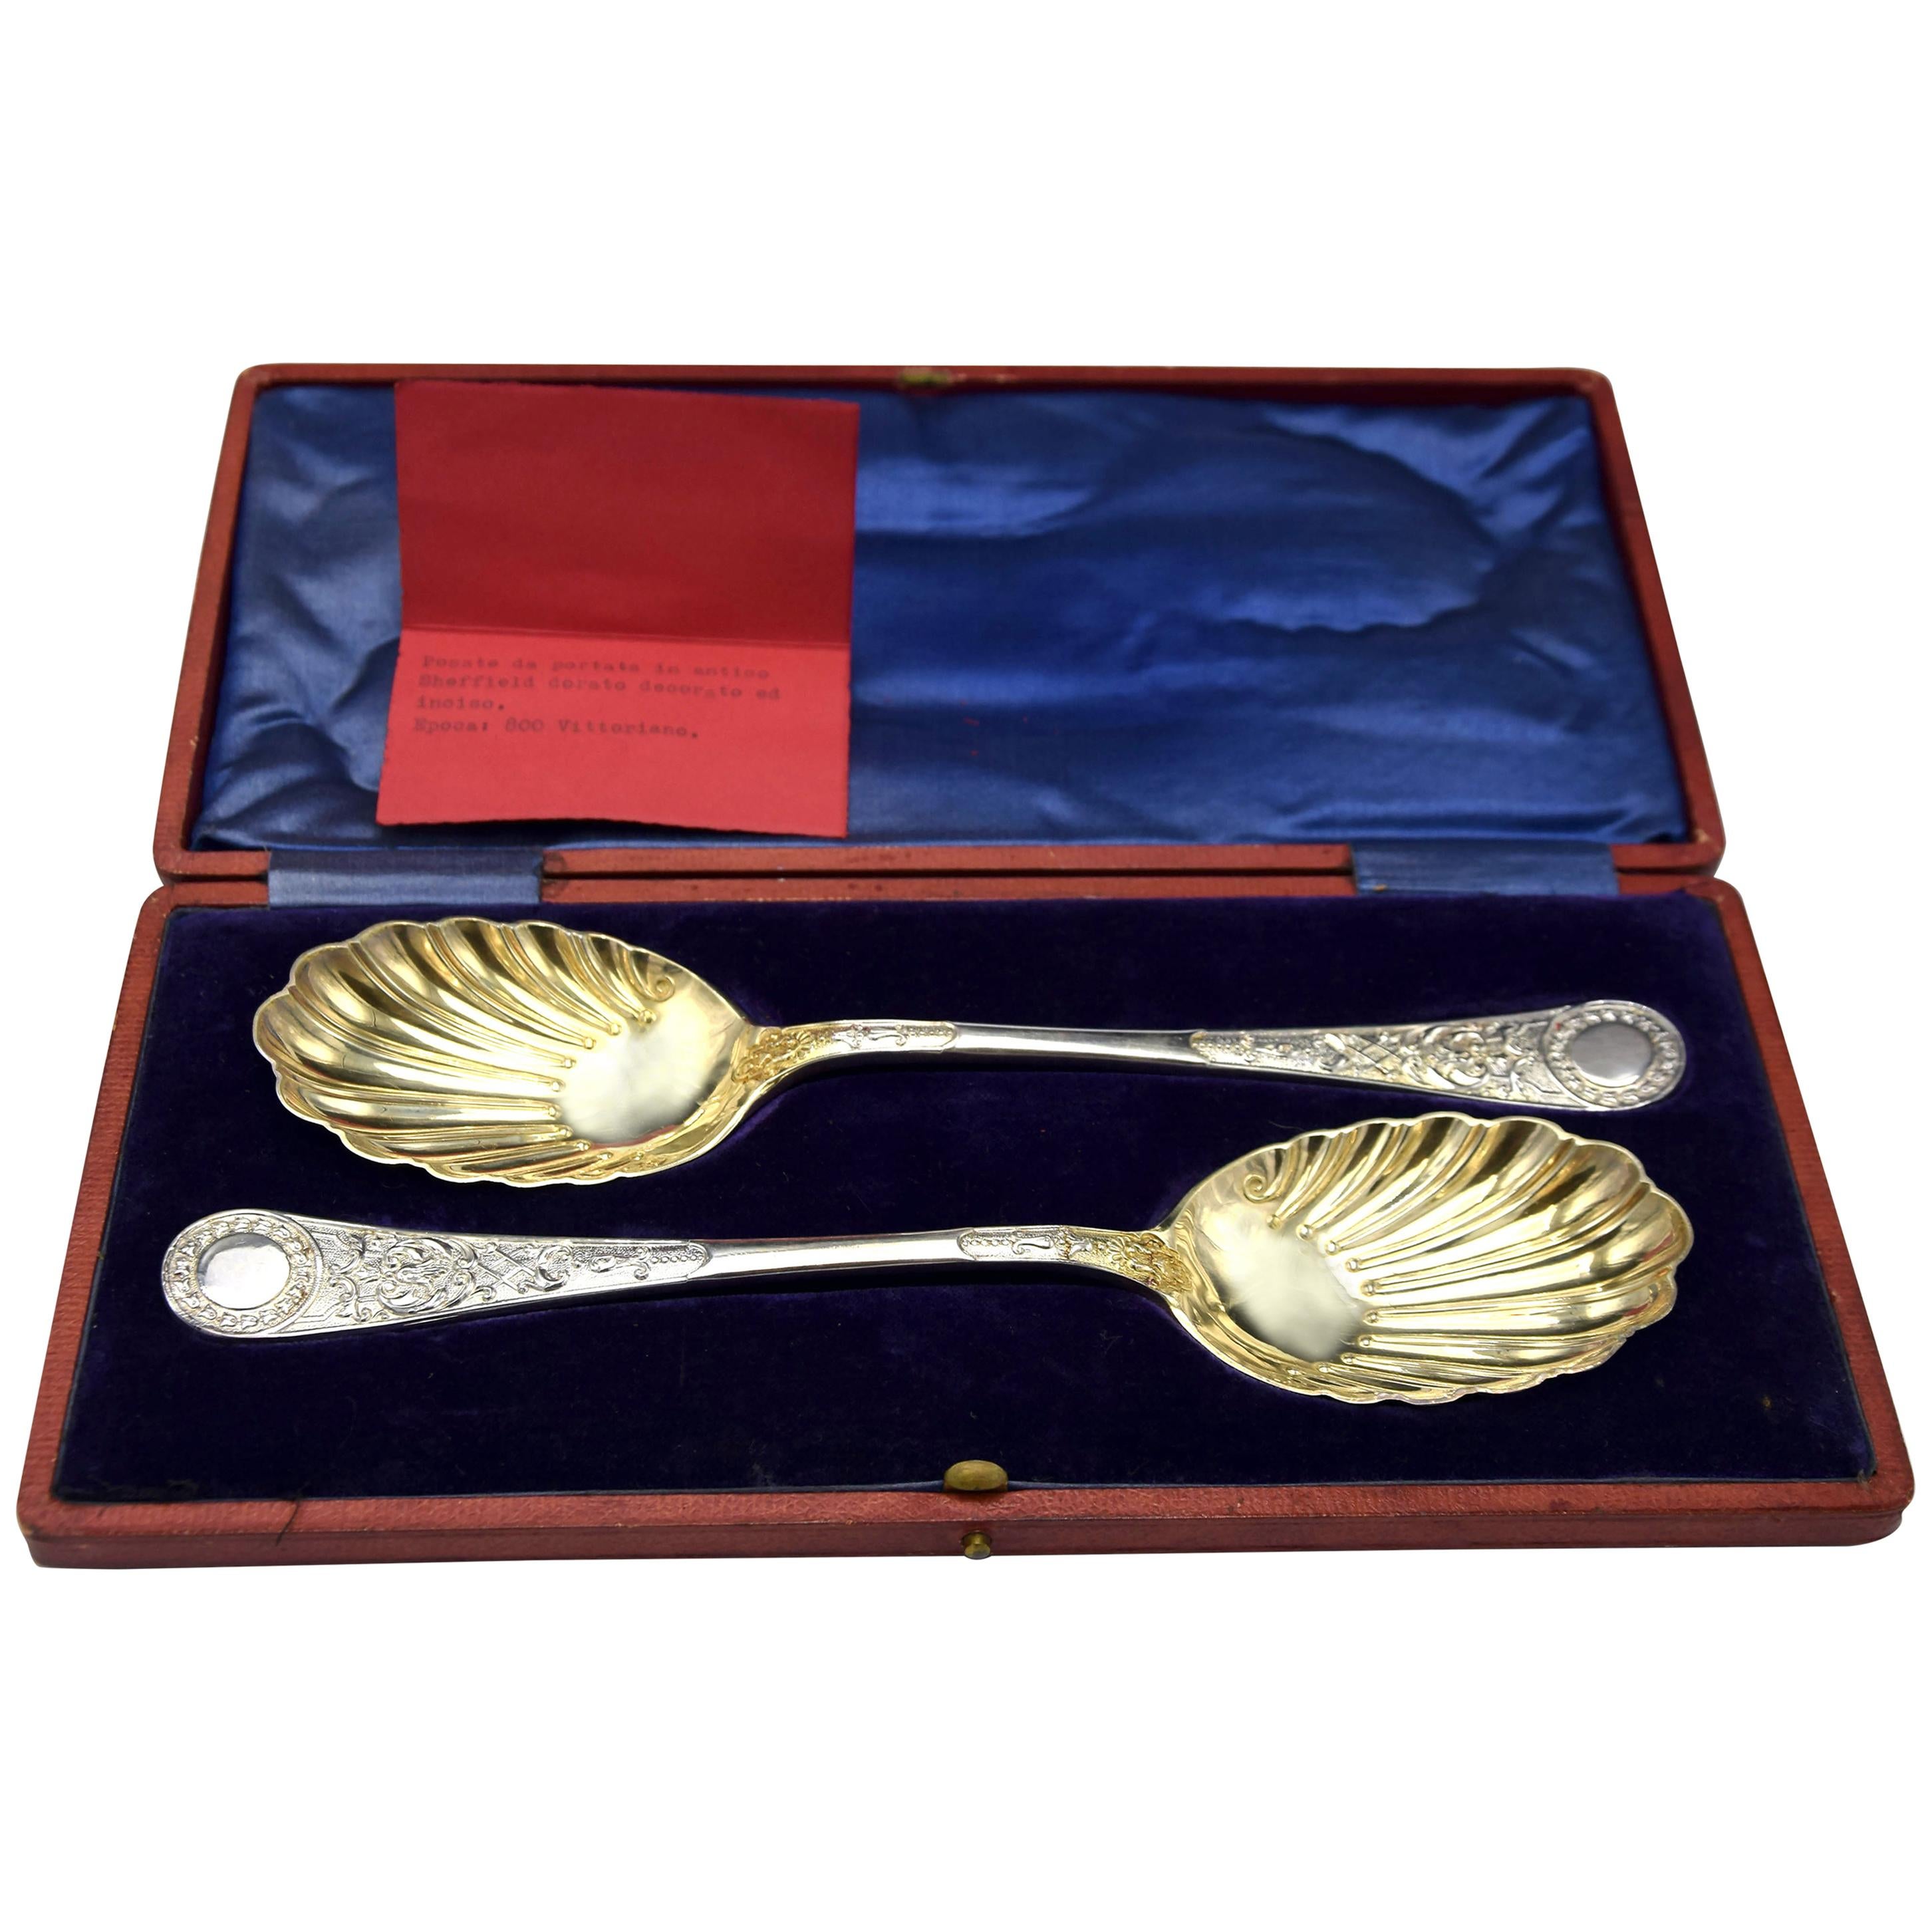 Vintage Silver Serving Cutlery - England Late 19th Century